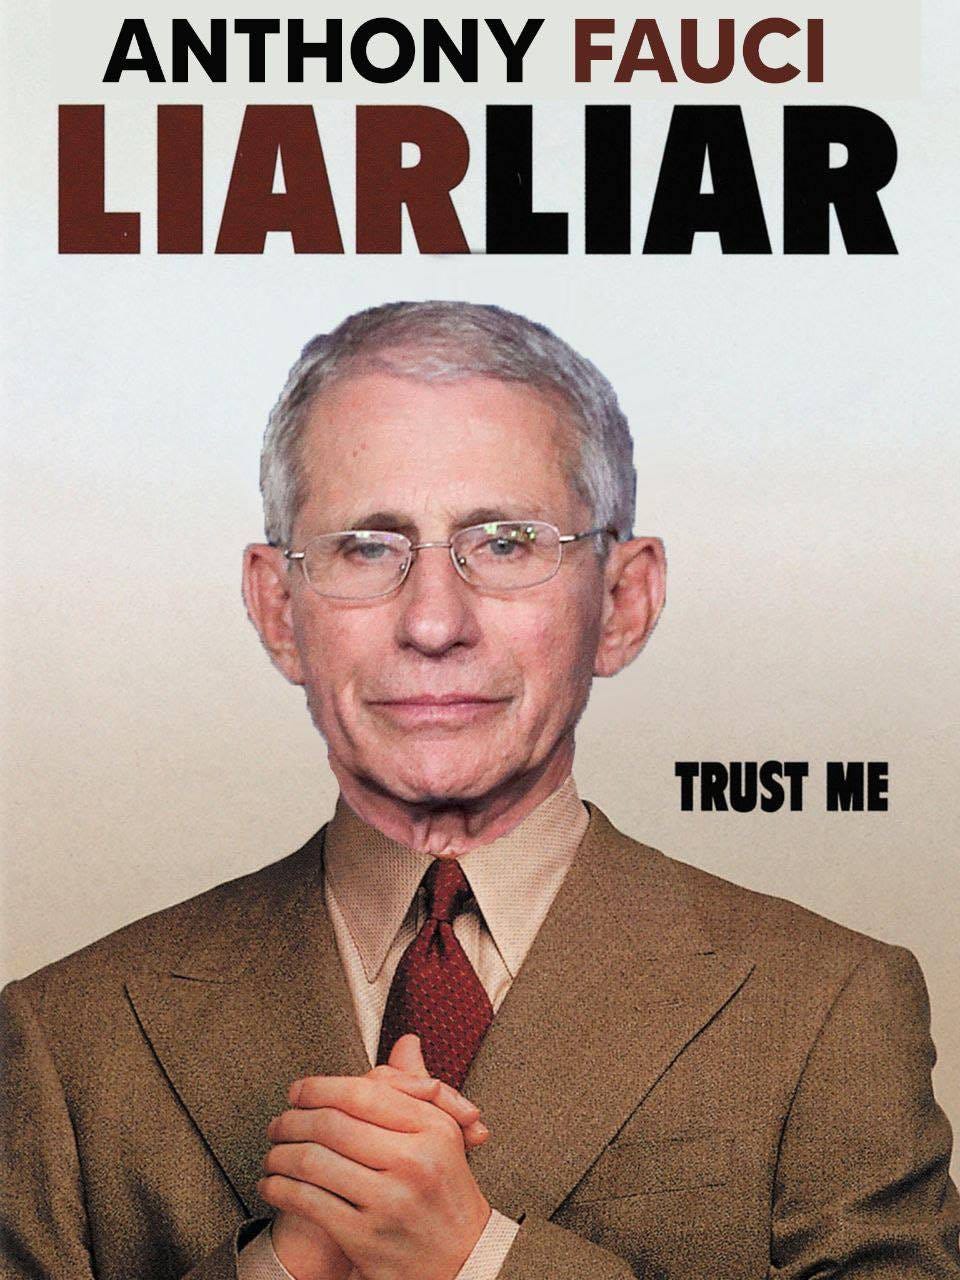 May be an image of 1 person and text that says 'ANTHONY FAUCI LIARLIAR TRUST ME'